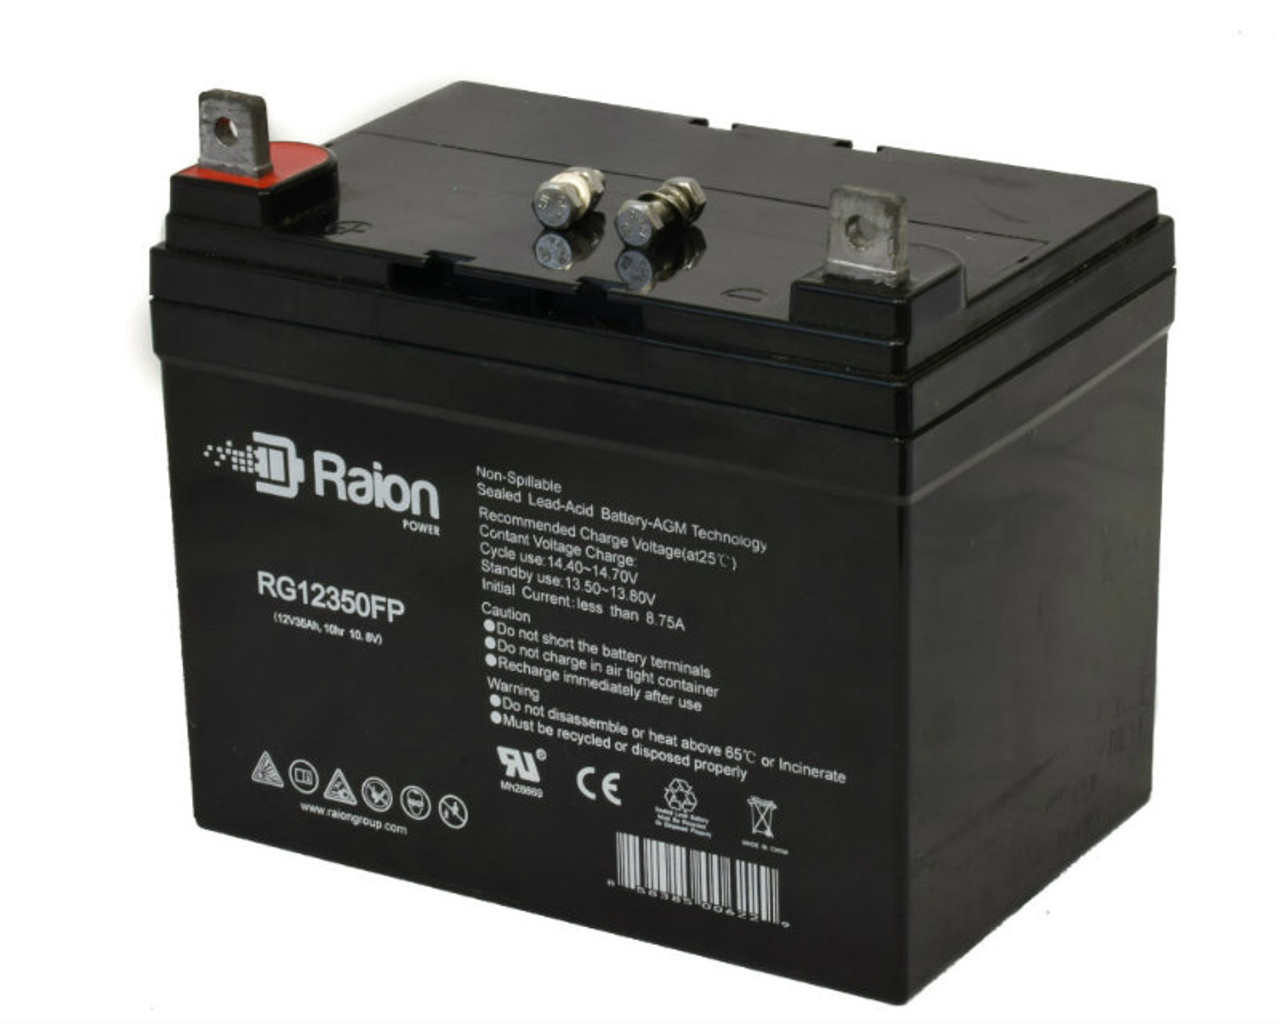 Raion Power Replacement 12V 35Ah RG12350FP Battery for Simplicity BROADMOOR 18H